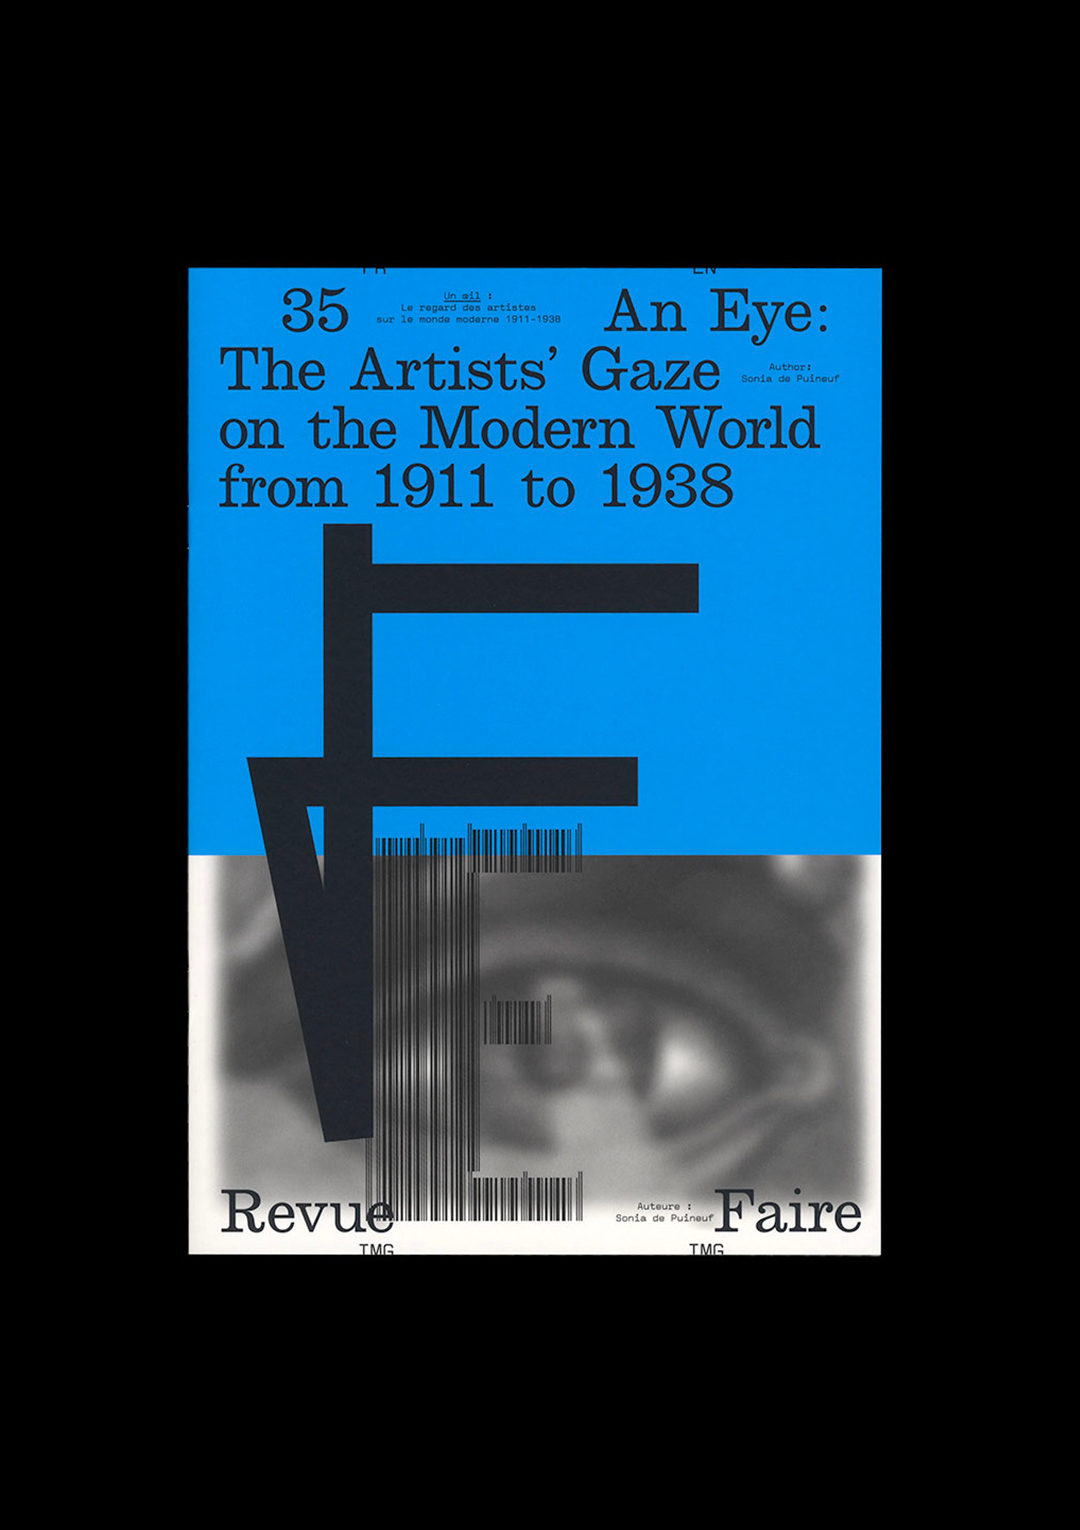 n°35 — An eye: artists’ view of the modern world 1911 – 1938. Author: Sonia de Puineuf